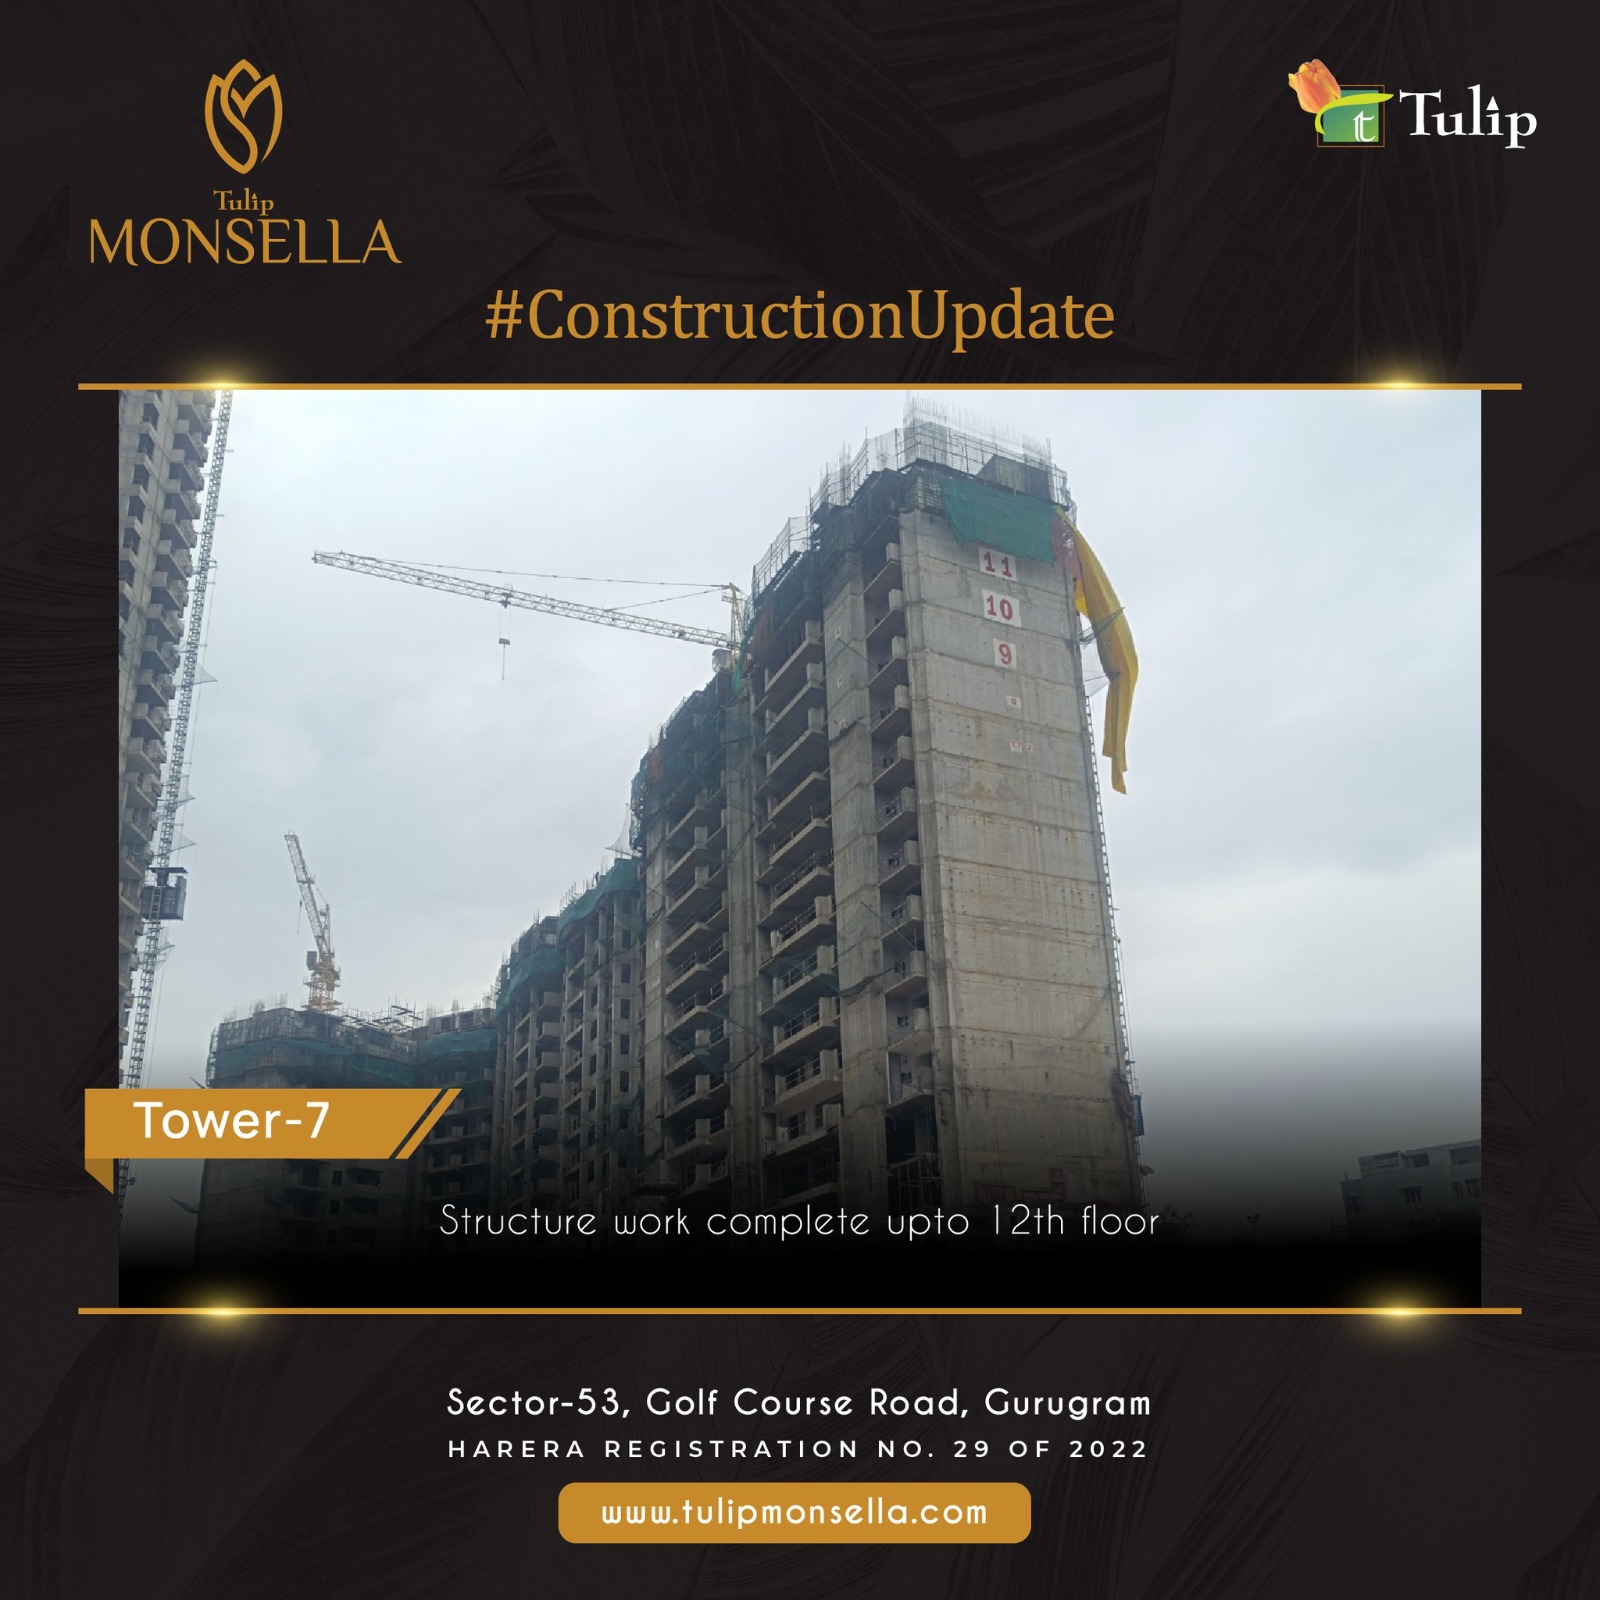 Tulip Monsella: Rising to New Heights in Sector-53, Golf Course Road, Gurugram Update